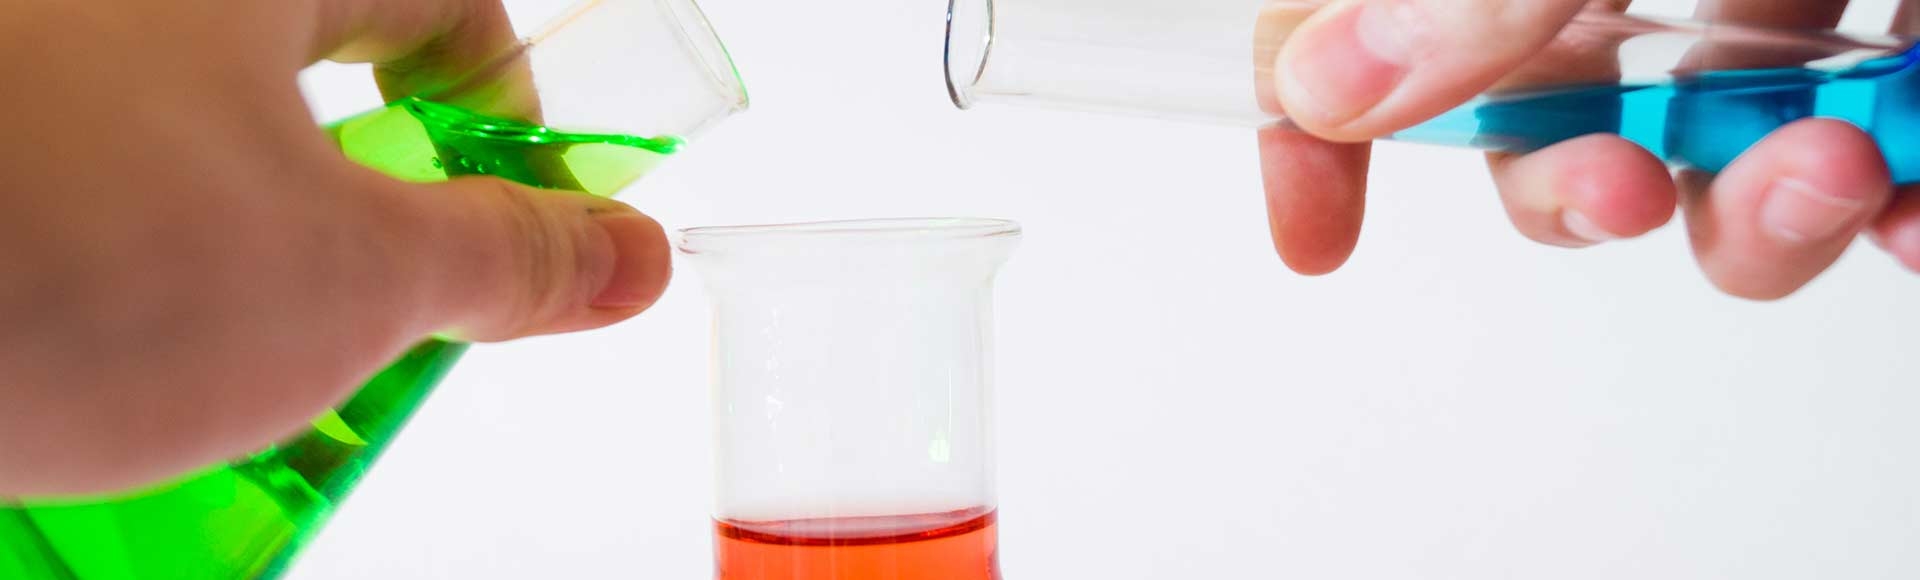 4 Awesome Summer Science Experiments and Activities for Kids